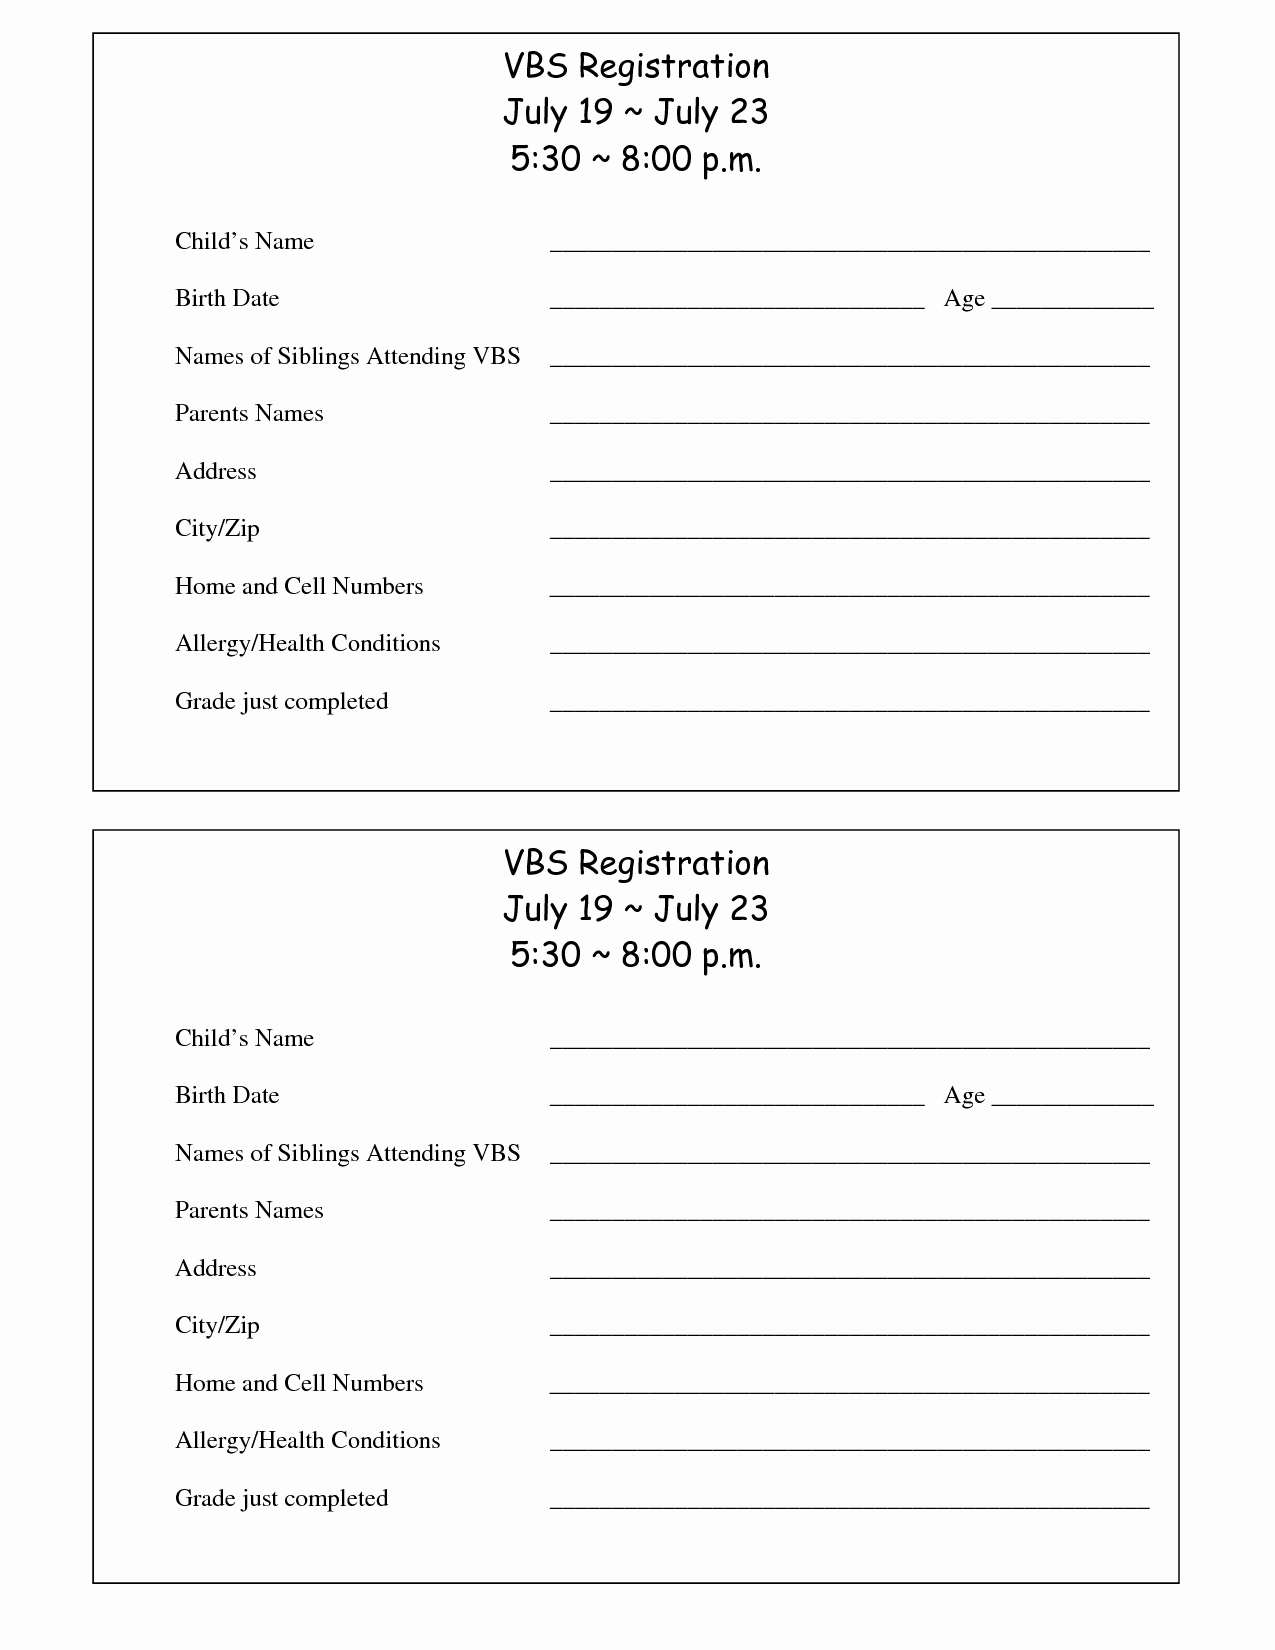 Free Registration forms Template Inspirational Printable Vbs Registration form Template